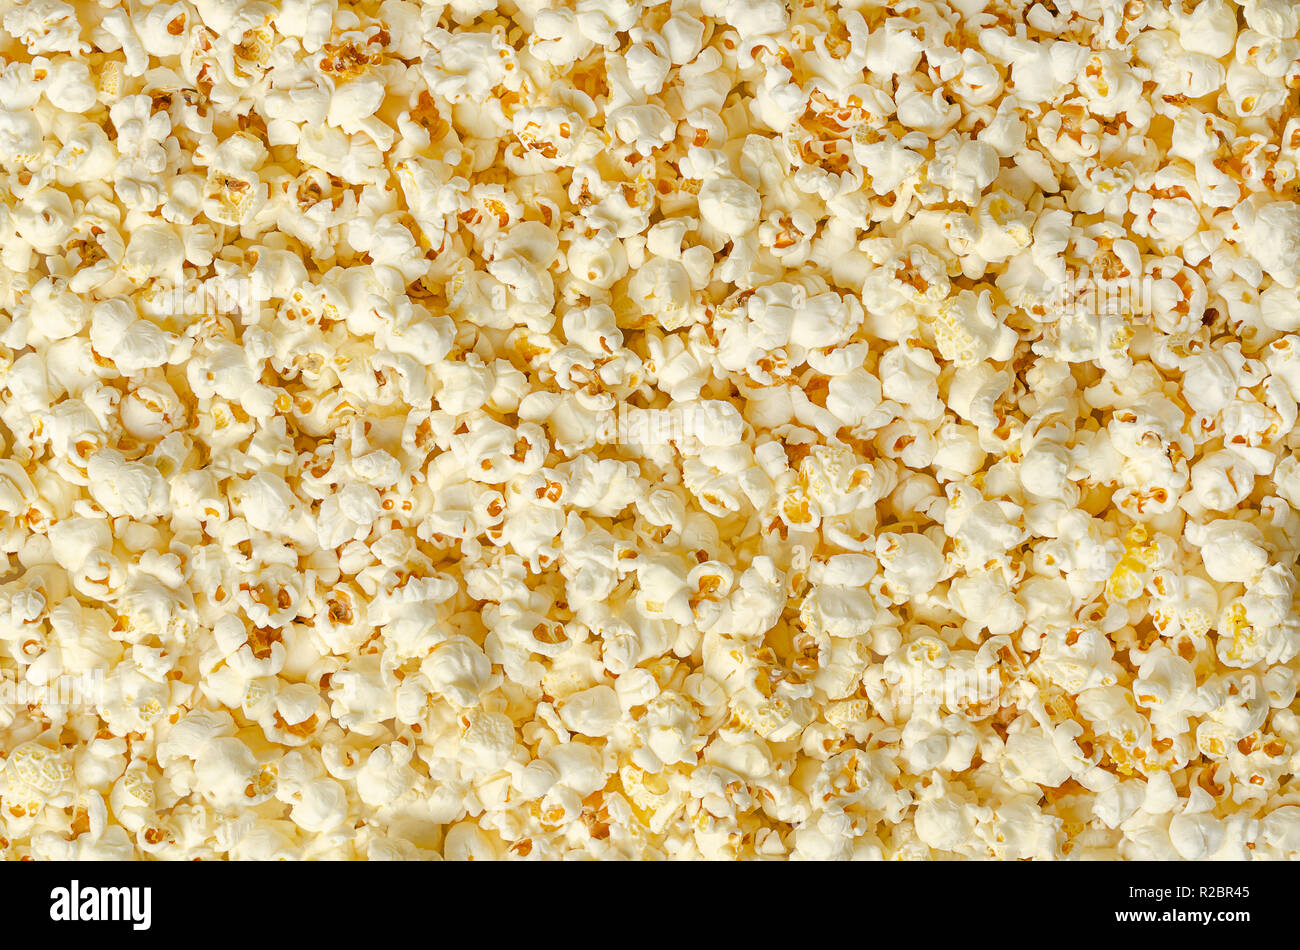 Popcorn, popped corn, surface and background. Butterfly shaped popcorn puffed up from the kernels, after it has been heated. Stock Photo